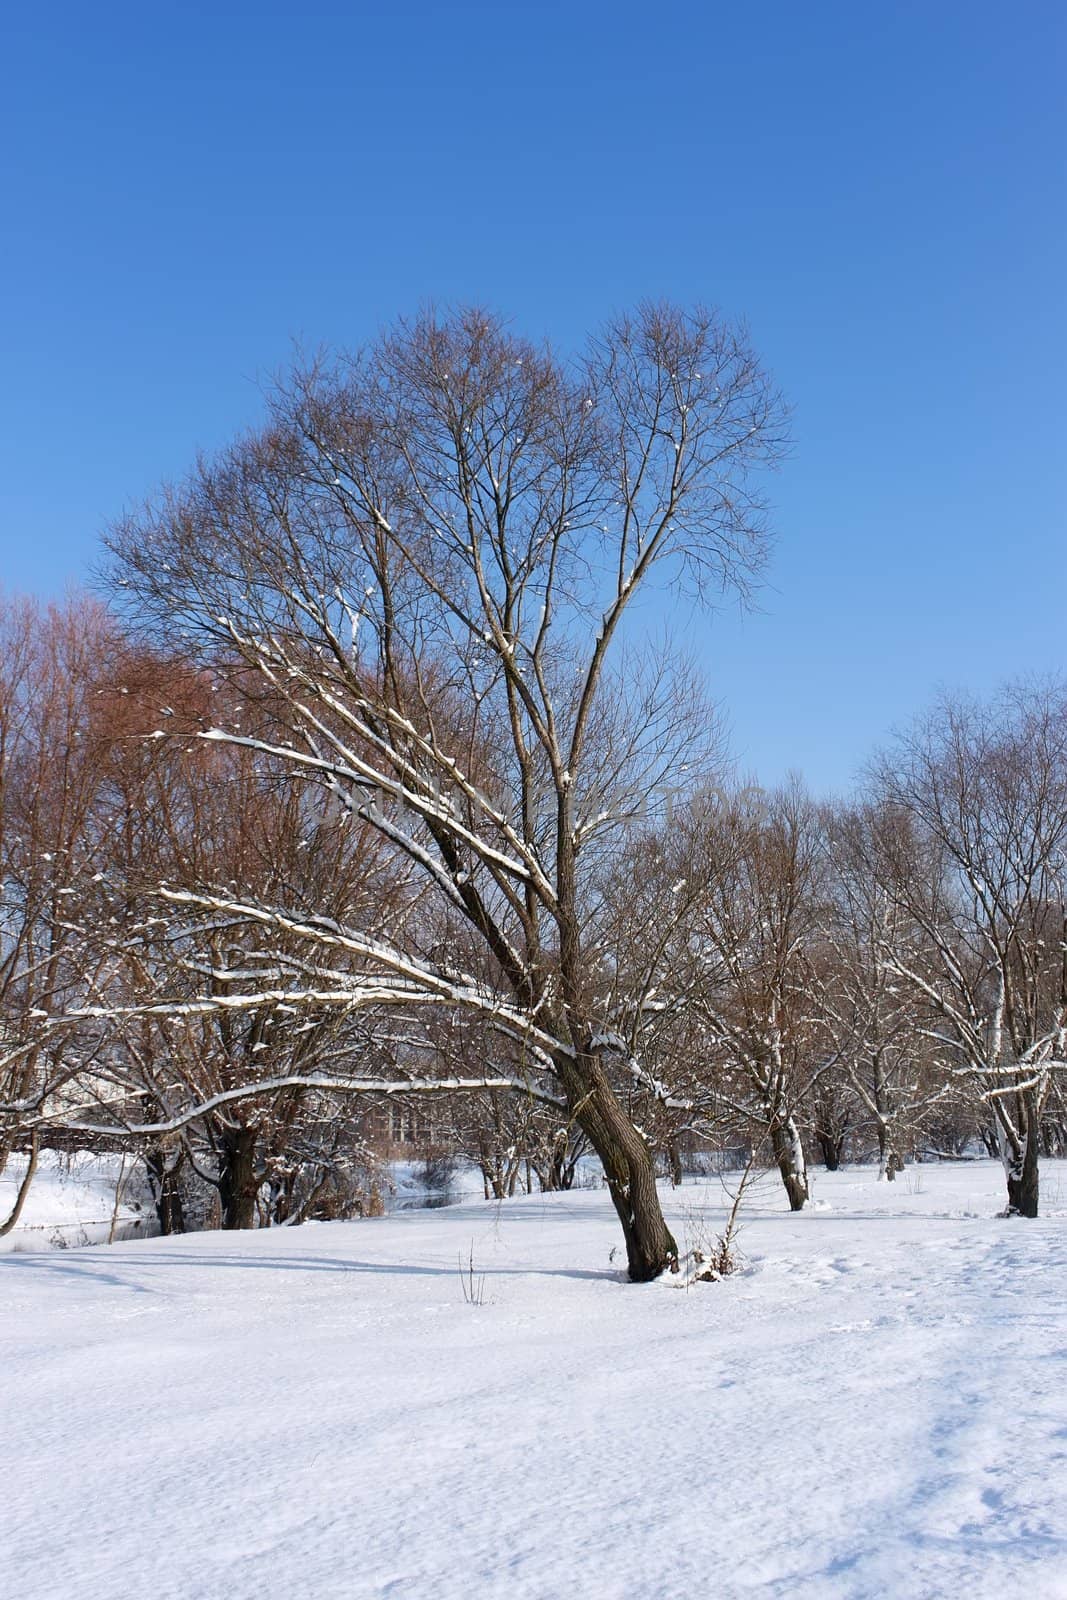 Snow-covered trees in urban park by qiiip